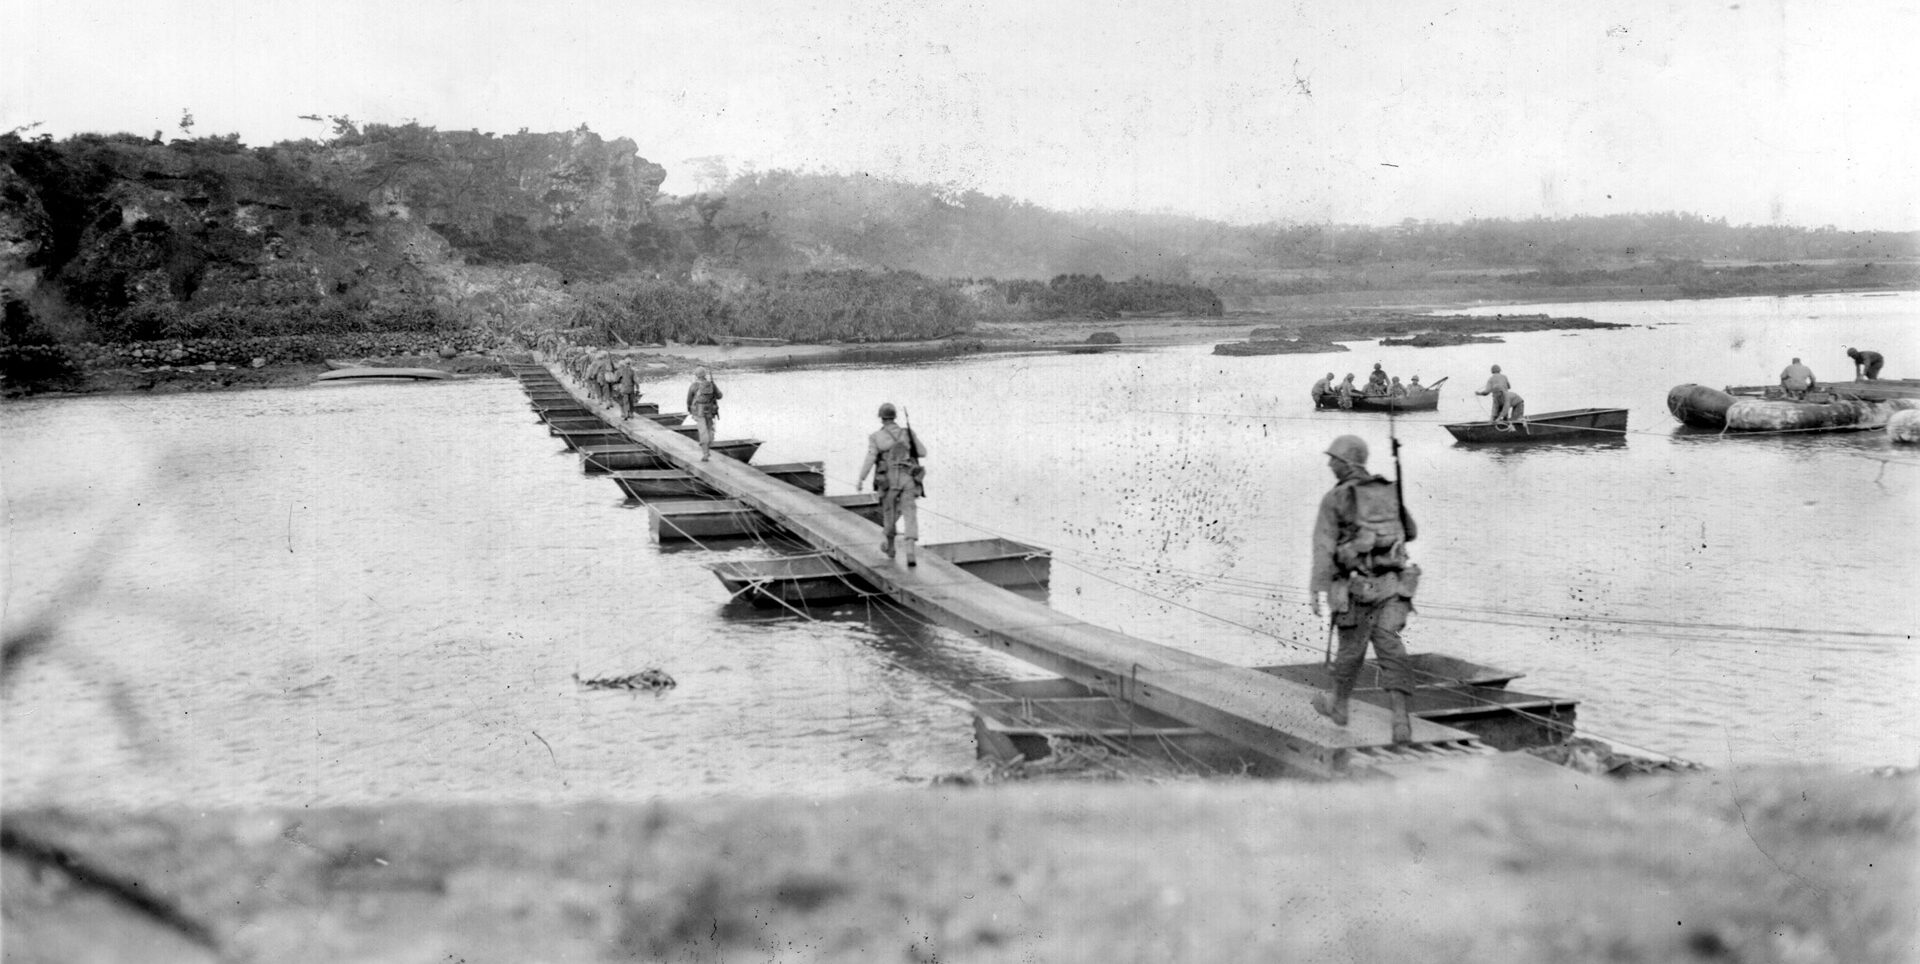 Men of the 27th Infantry Division’s Company A, 106th Infantry Regiment, cross a footbridge on their way to attack the Japanese in Machinato Village on April 18, 1945.